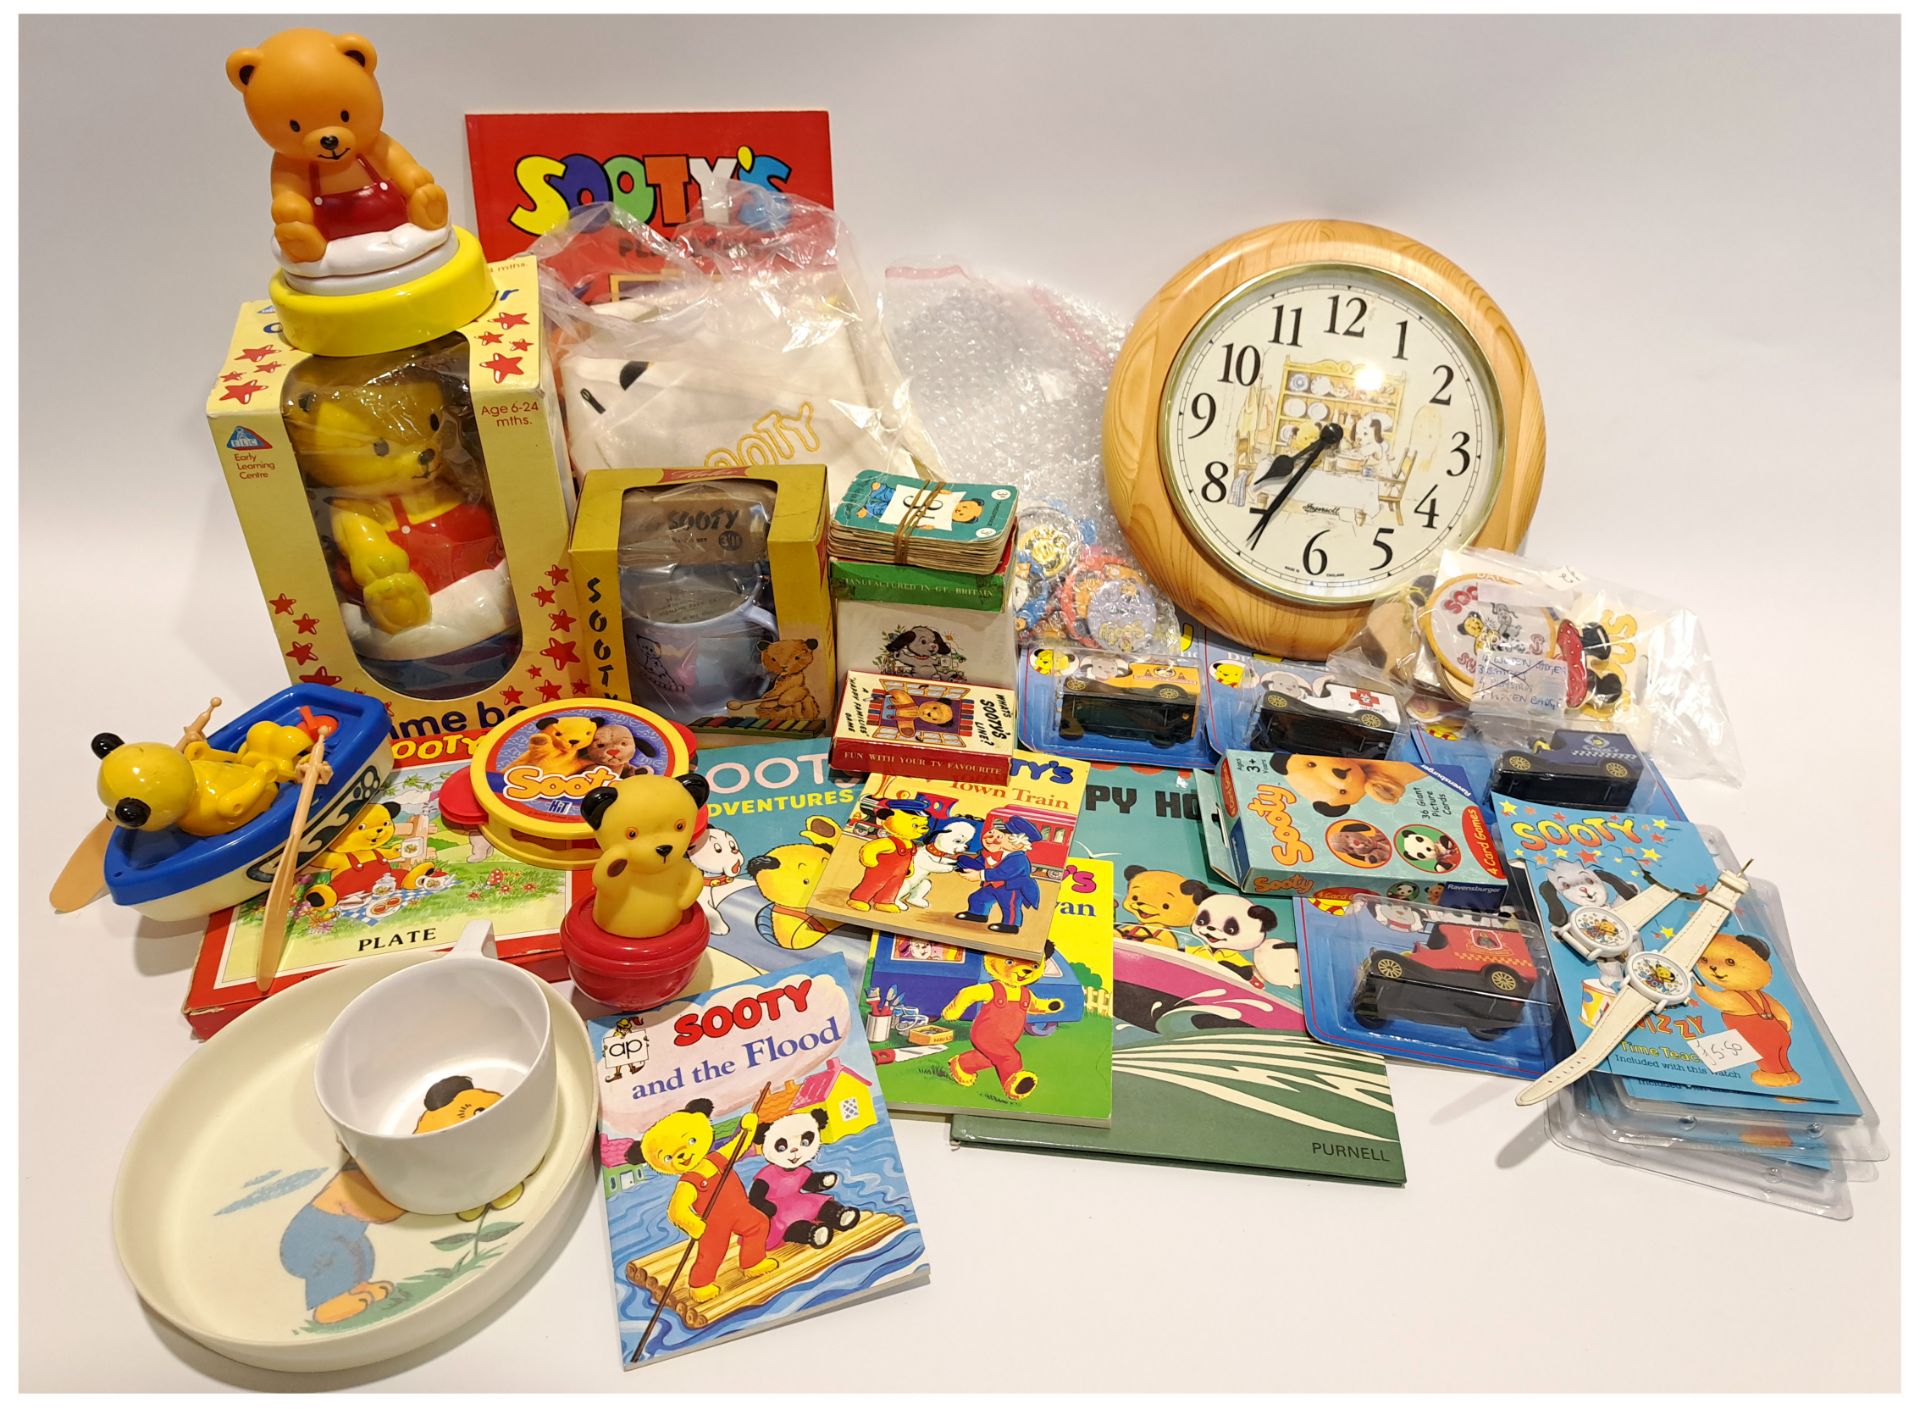 Quantity of Sooty & Sweep Collectibles